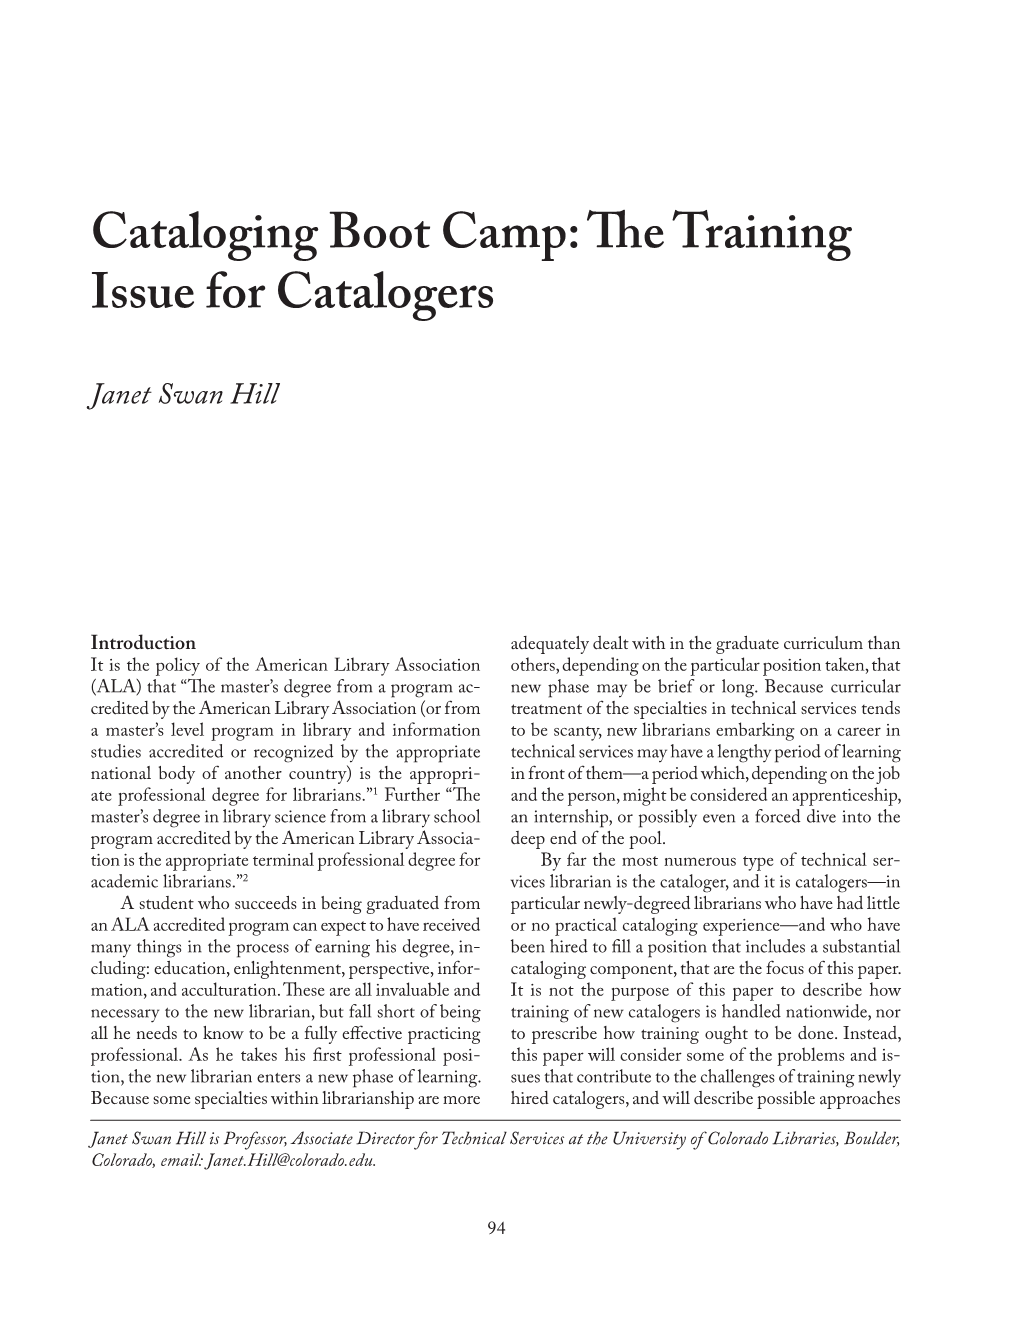 Cataloging Boot Camp: the Training Issue for Catalogers